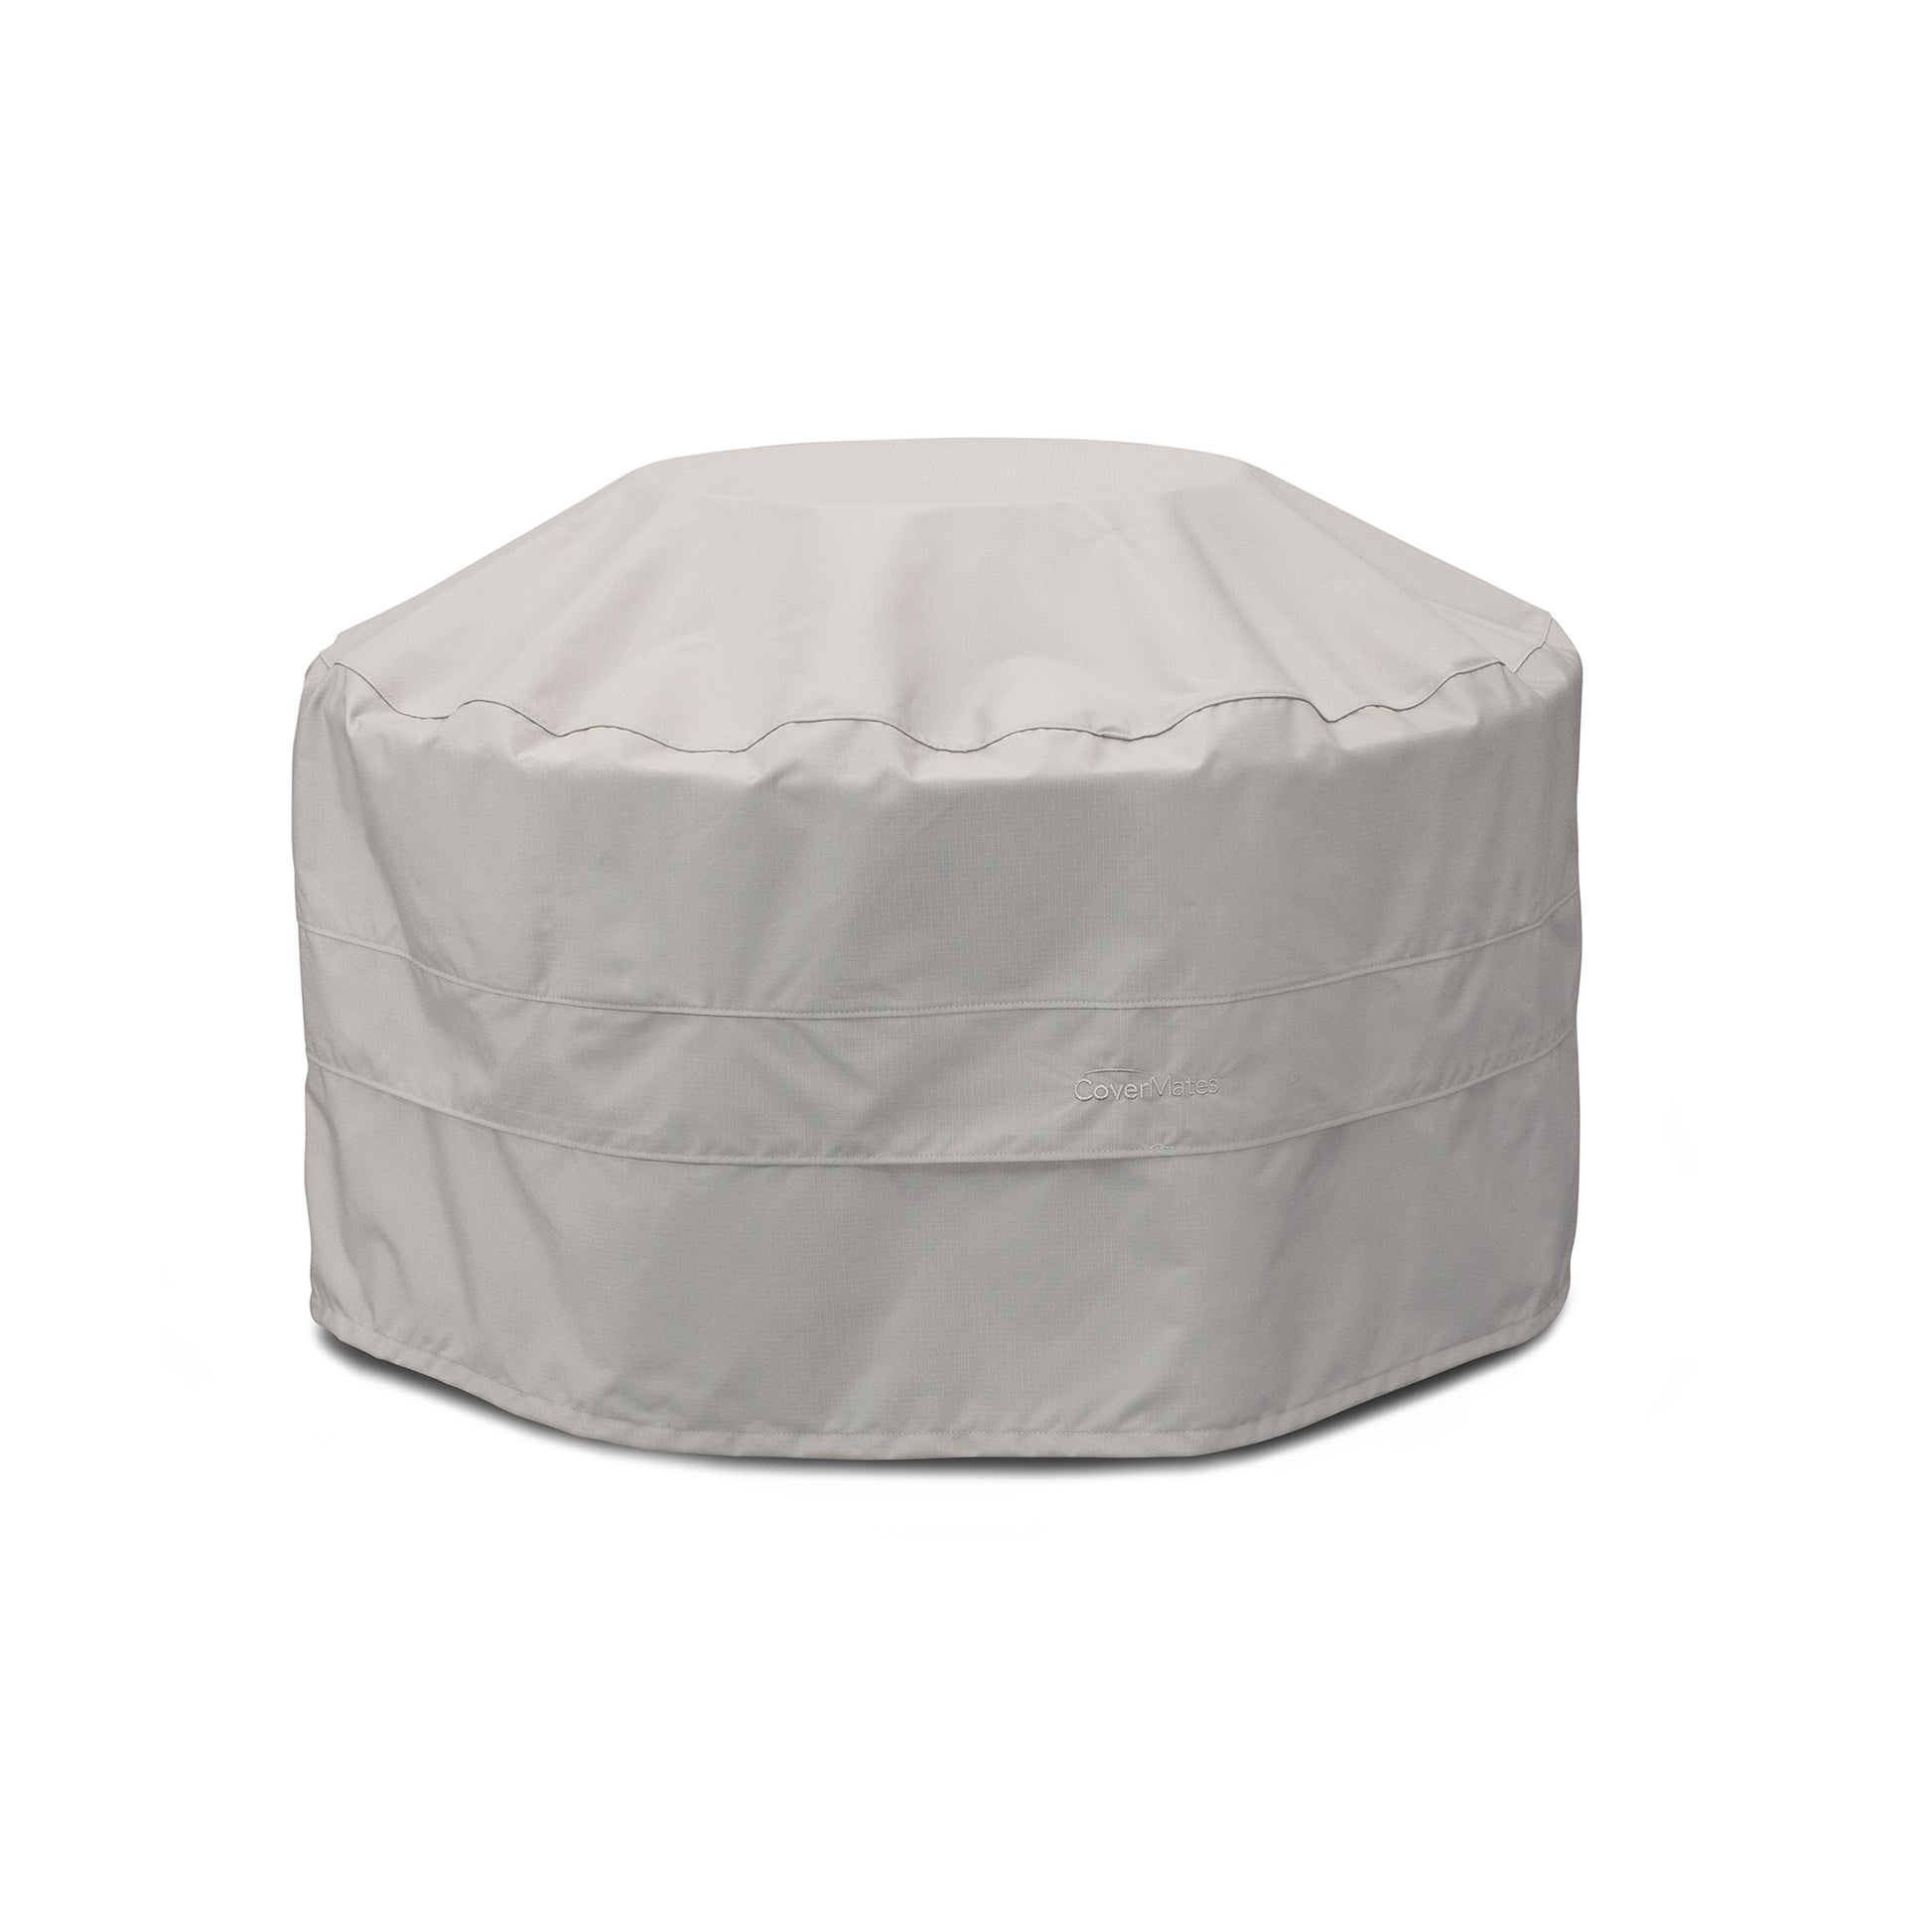 A grey, round POLYWOOD patio furniture cover on a white background. The cover is designed to protect outdoor items such as the POLYWOOD Round 48" Fire Pit Table from weather elements and features a snug fit with a rippled edge.